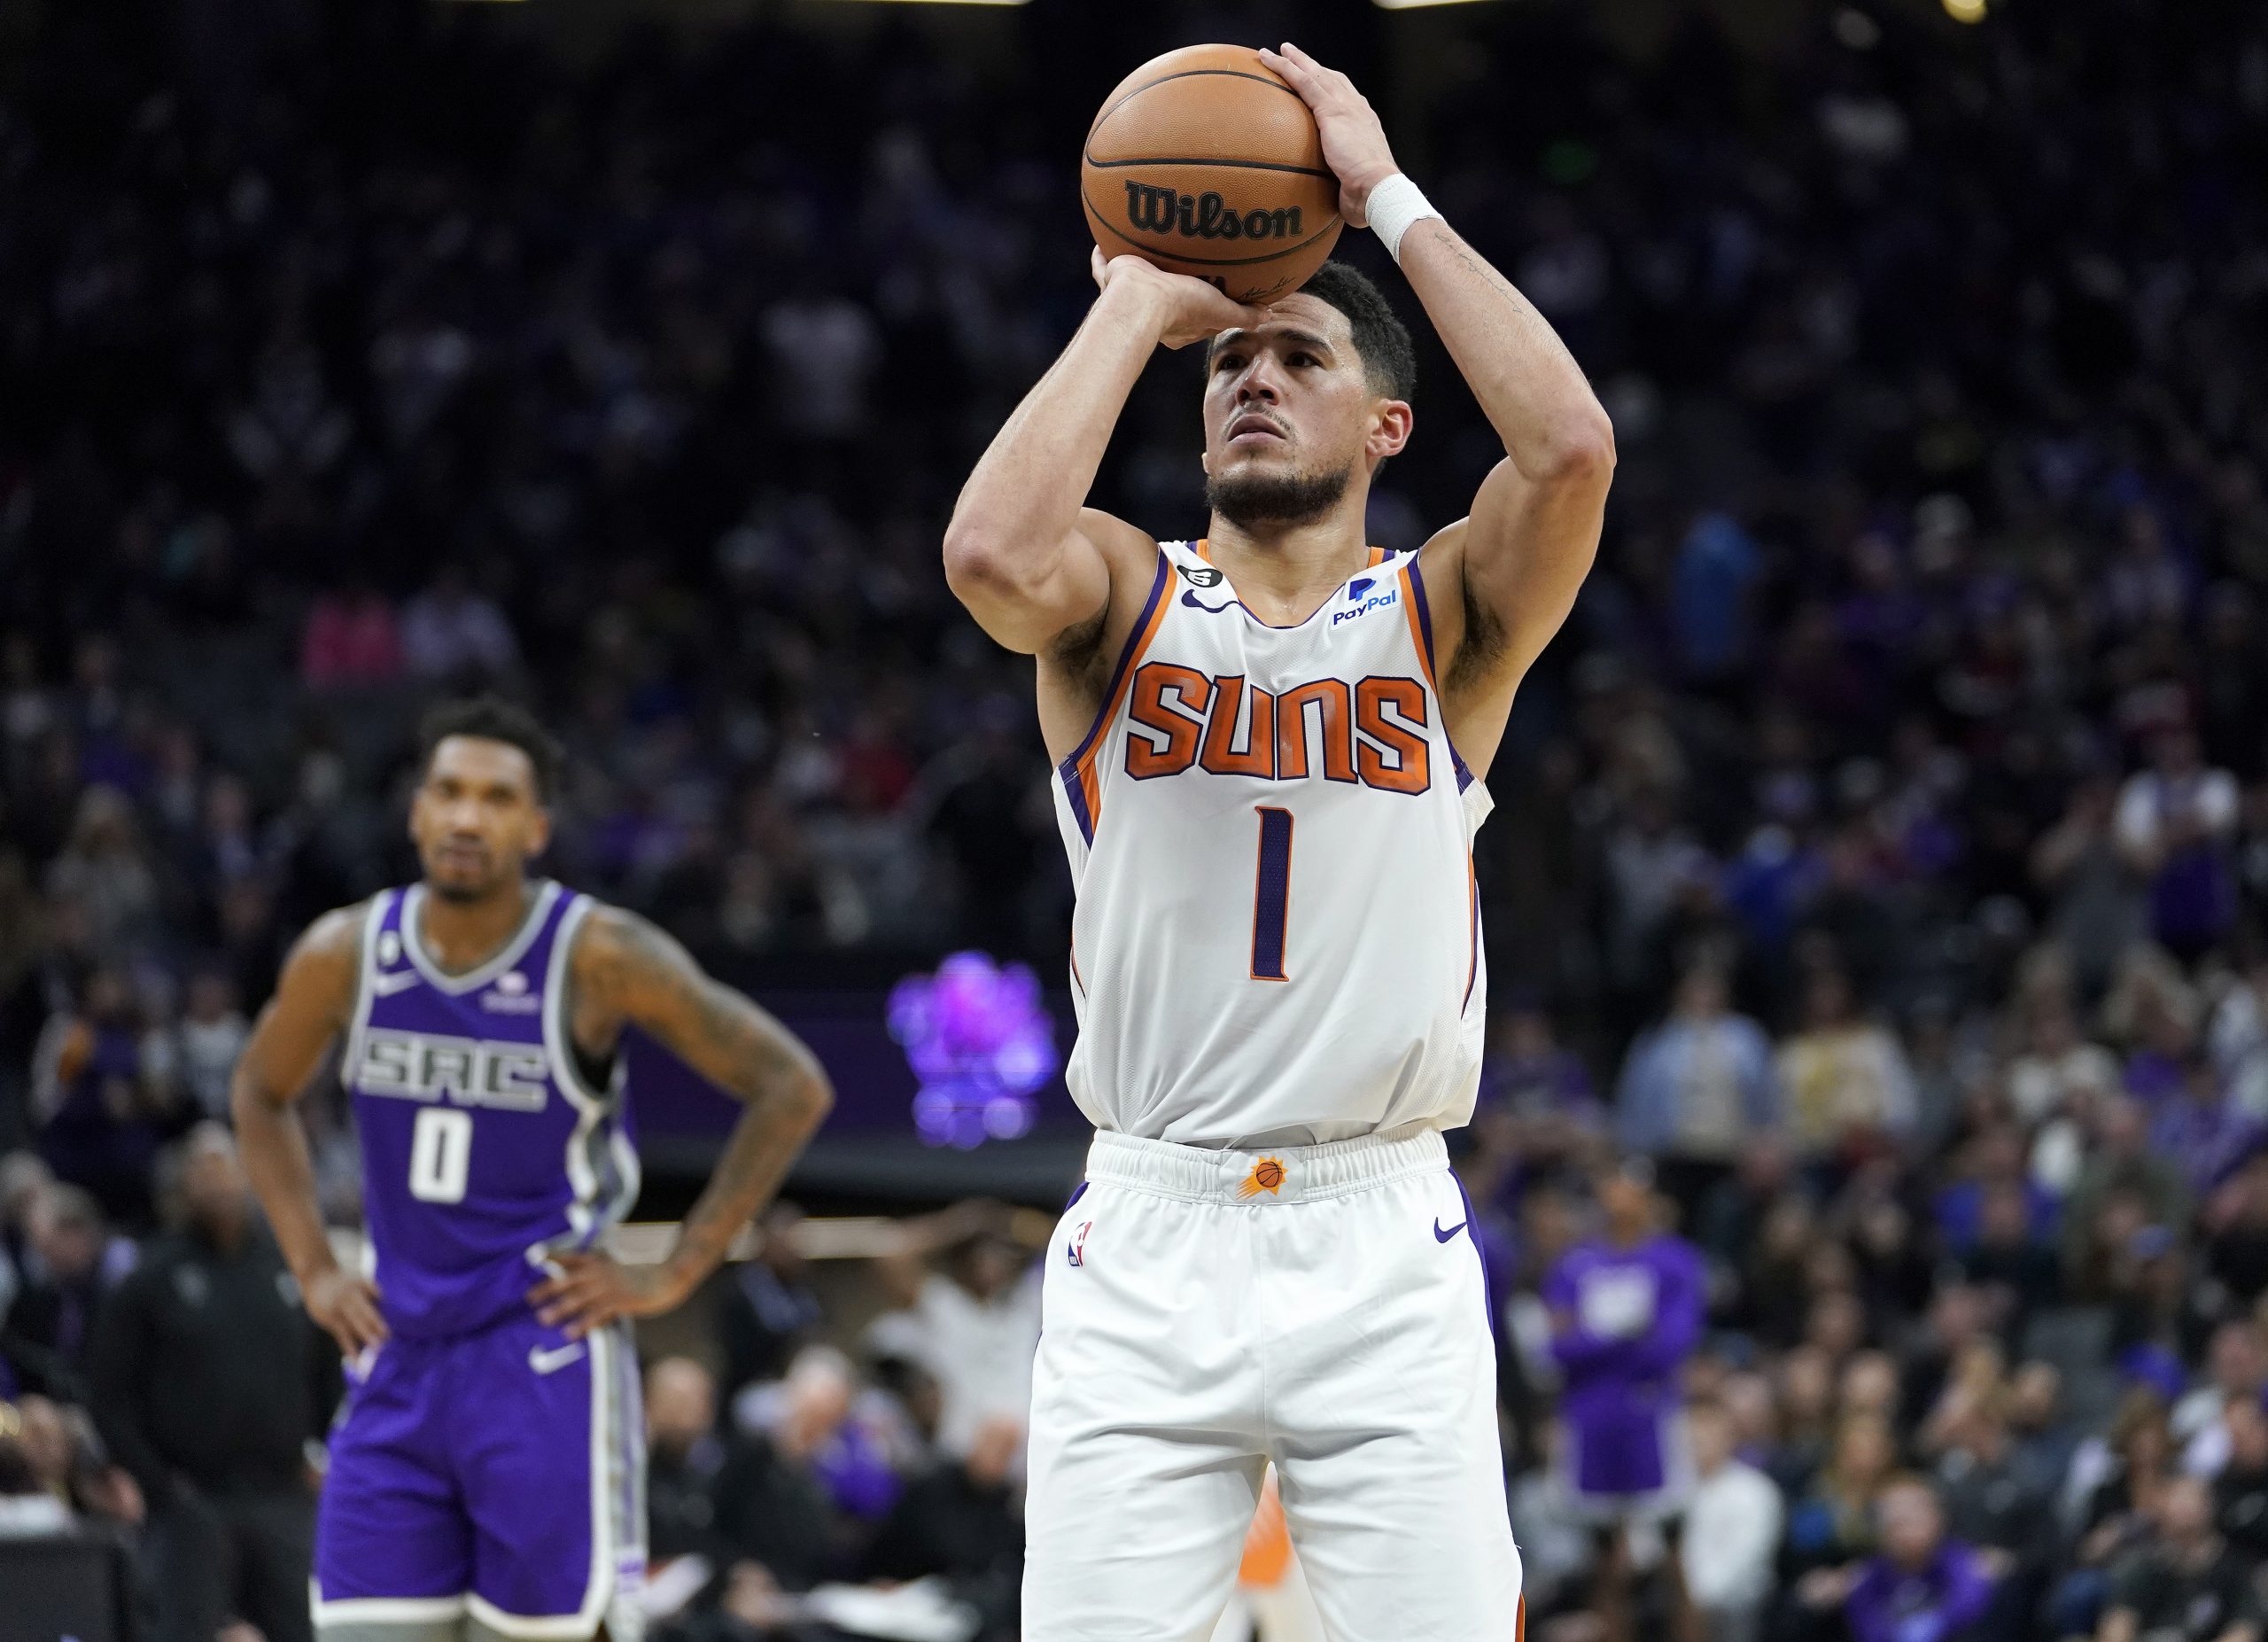 epa10335703 Phoenix Suns guard Devin Booker (R) shoots a free throw as Sacramento Kings guard Malik Monk (L) looks on during the second half of the NBA game at Golden 1 Center in Sacramento, California, USA, 28 November 2022.  EPA/JOHN G. MABANGLO  SHUTTERSTOCK OUT